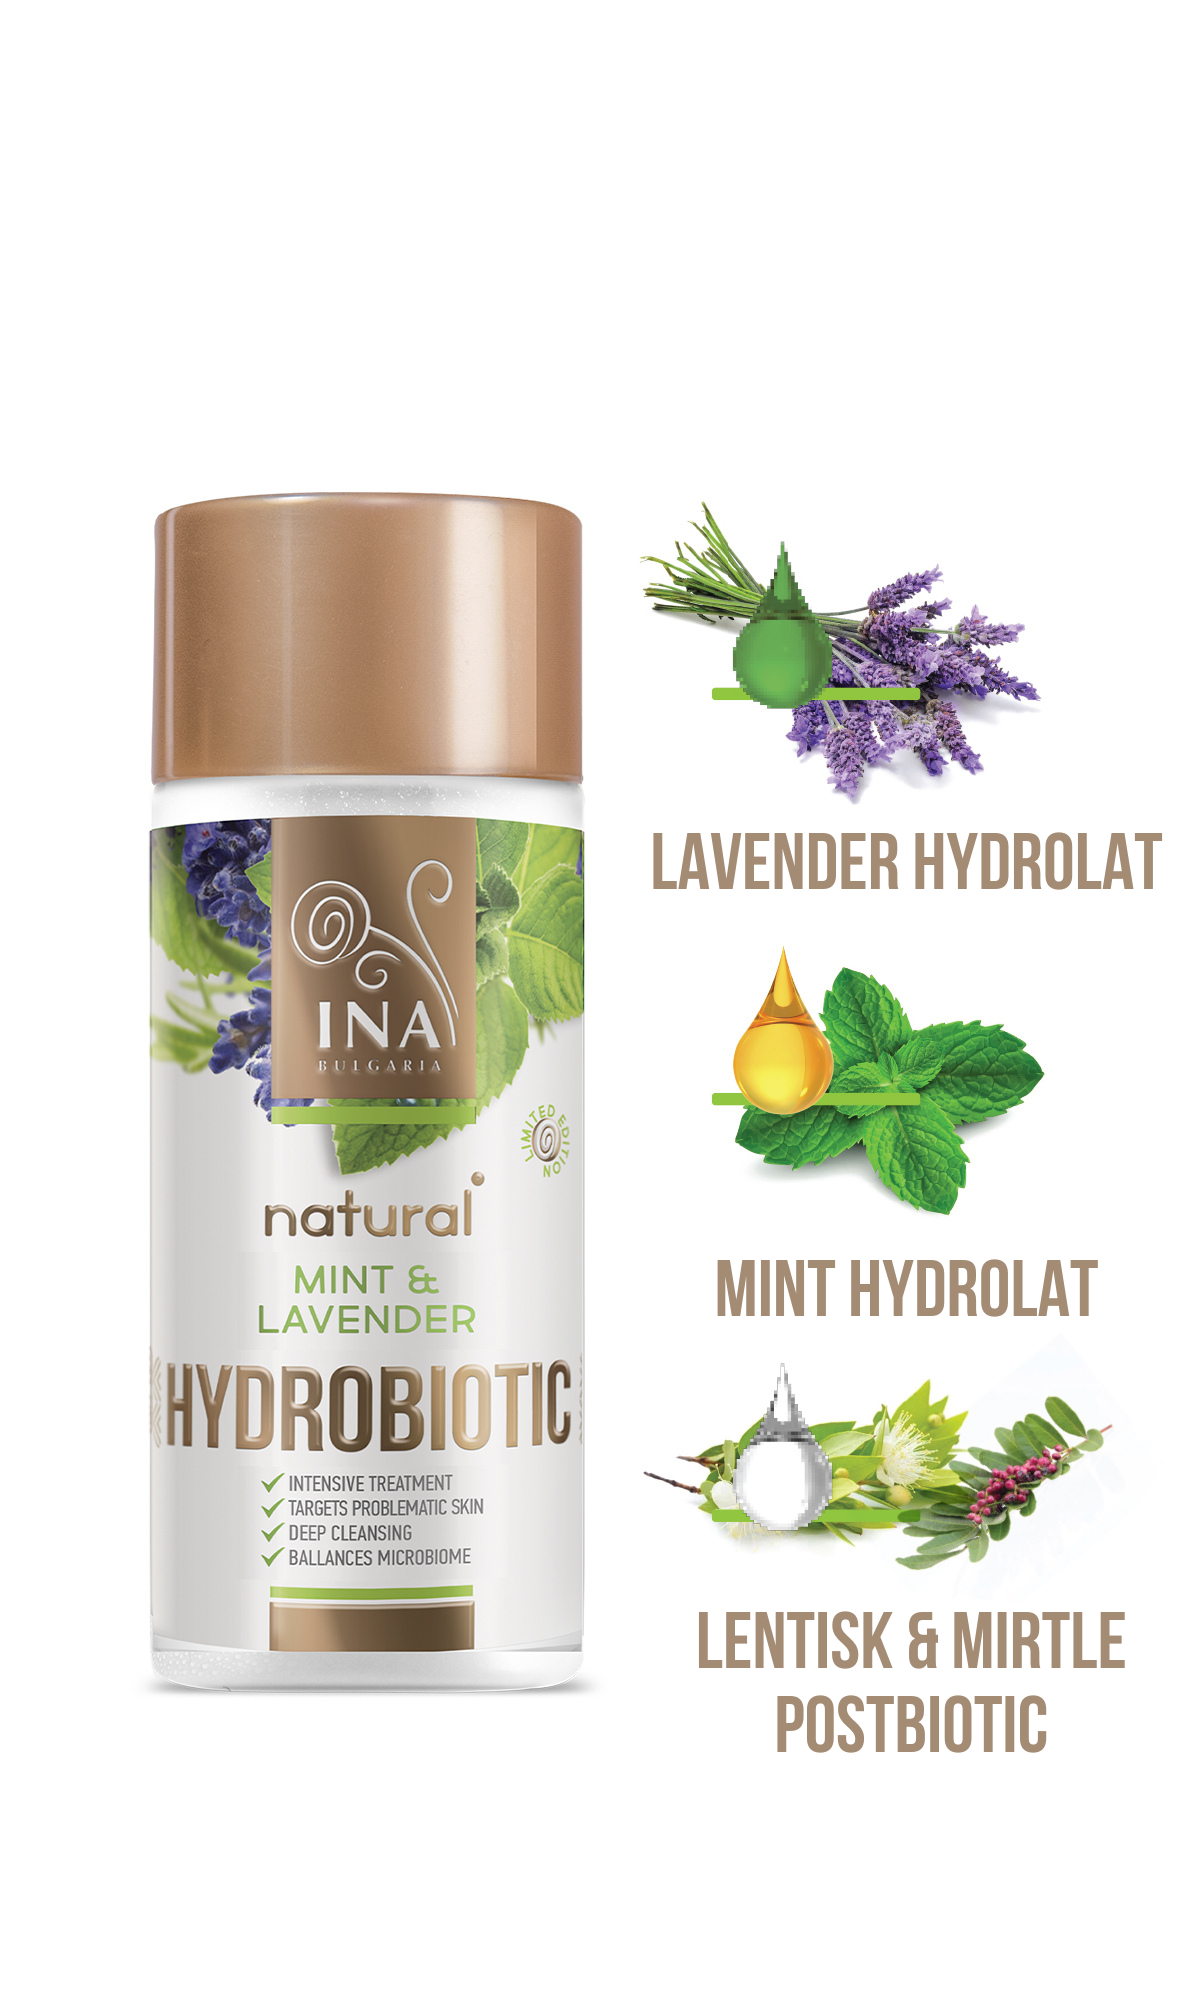 Hydrobiotic - Lavender & Mint - intensive care for Acne